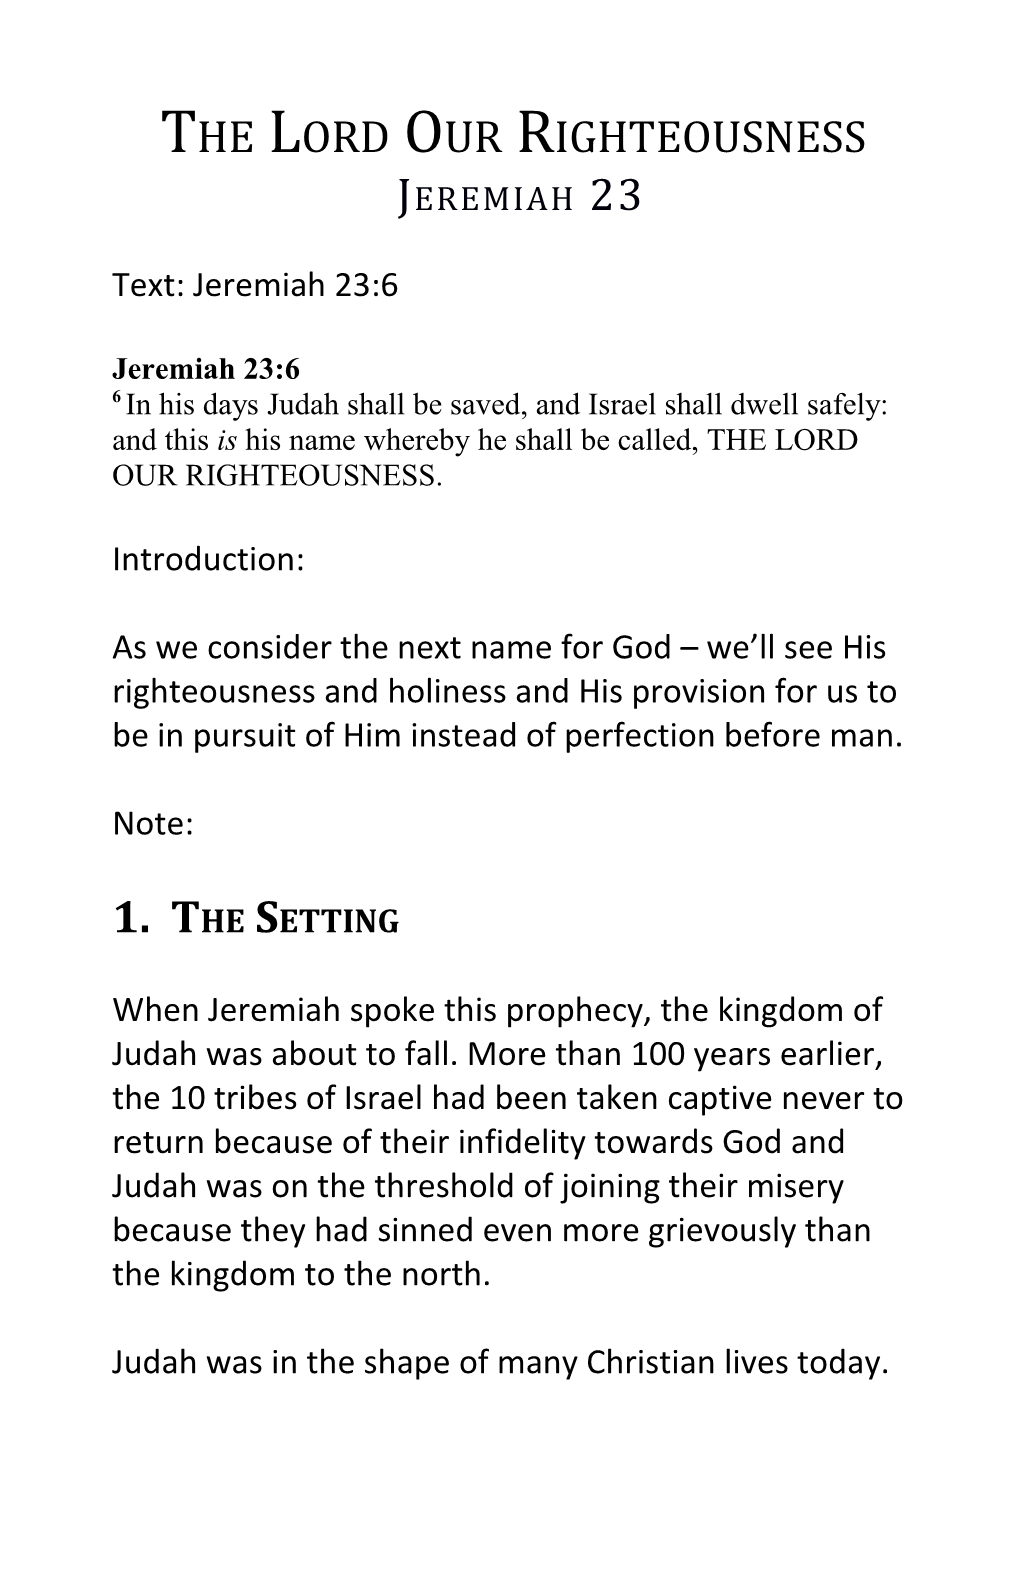 Judah Was in the Shape of Many Christian Lives Today